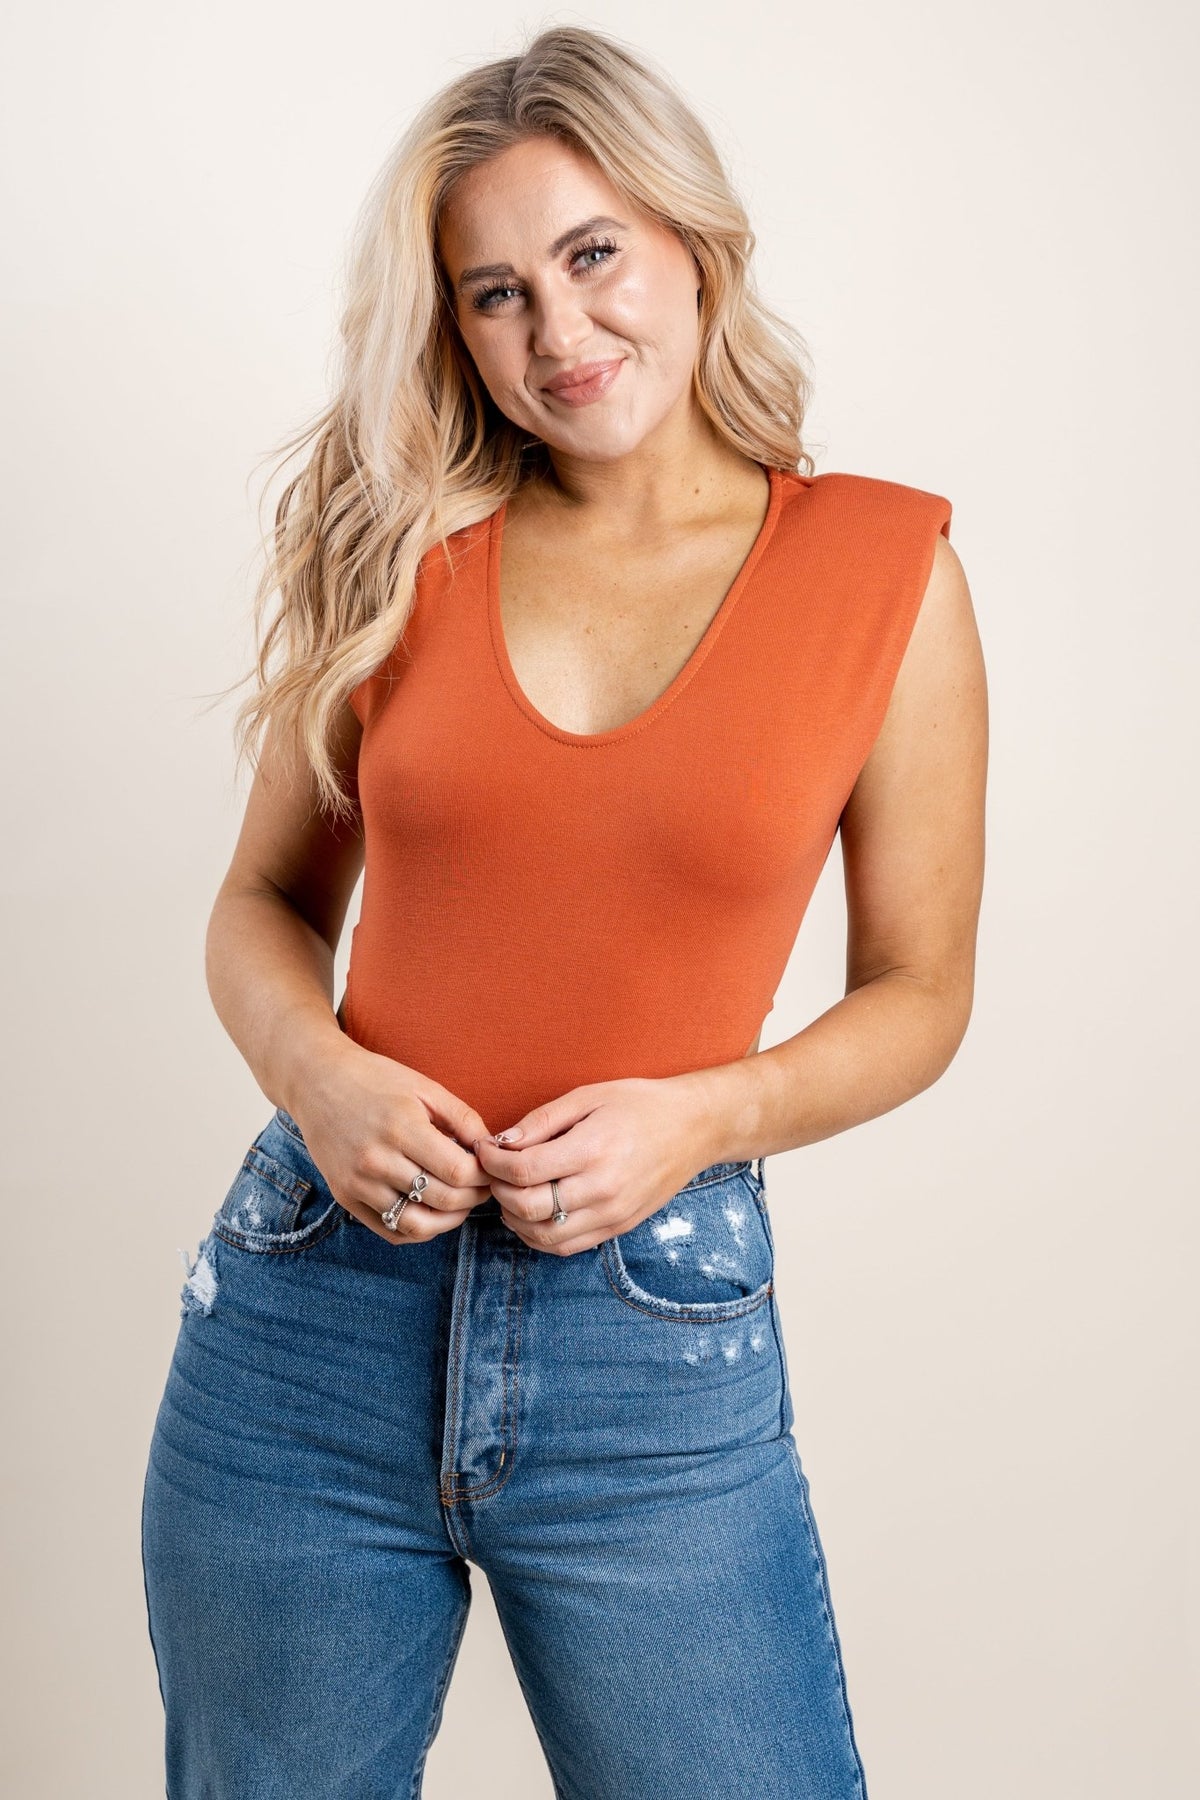 Shoulder pad v-neck bodysuit withered rose - Cute bodysuit - Trendy Bodysuits at Lush Fashion Lounge Boutique in Oklahoma City